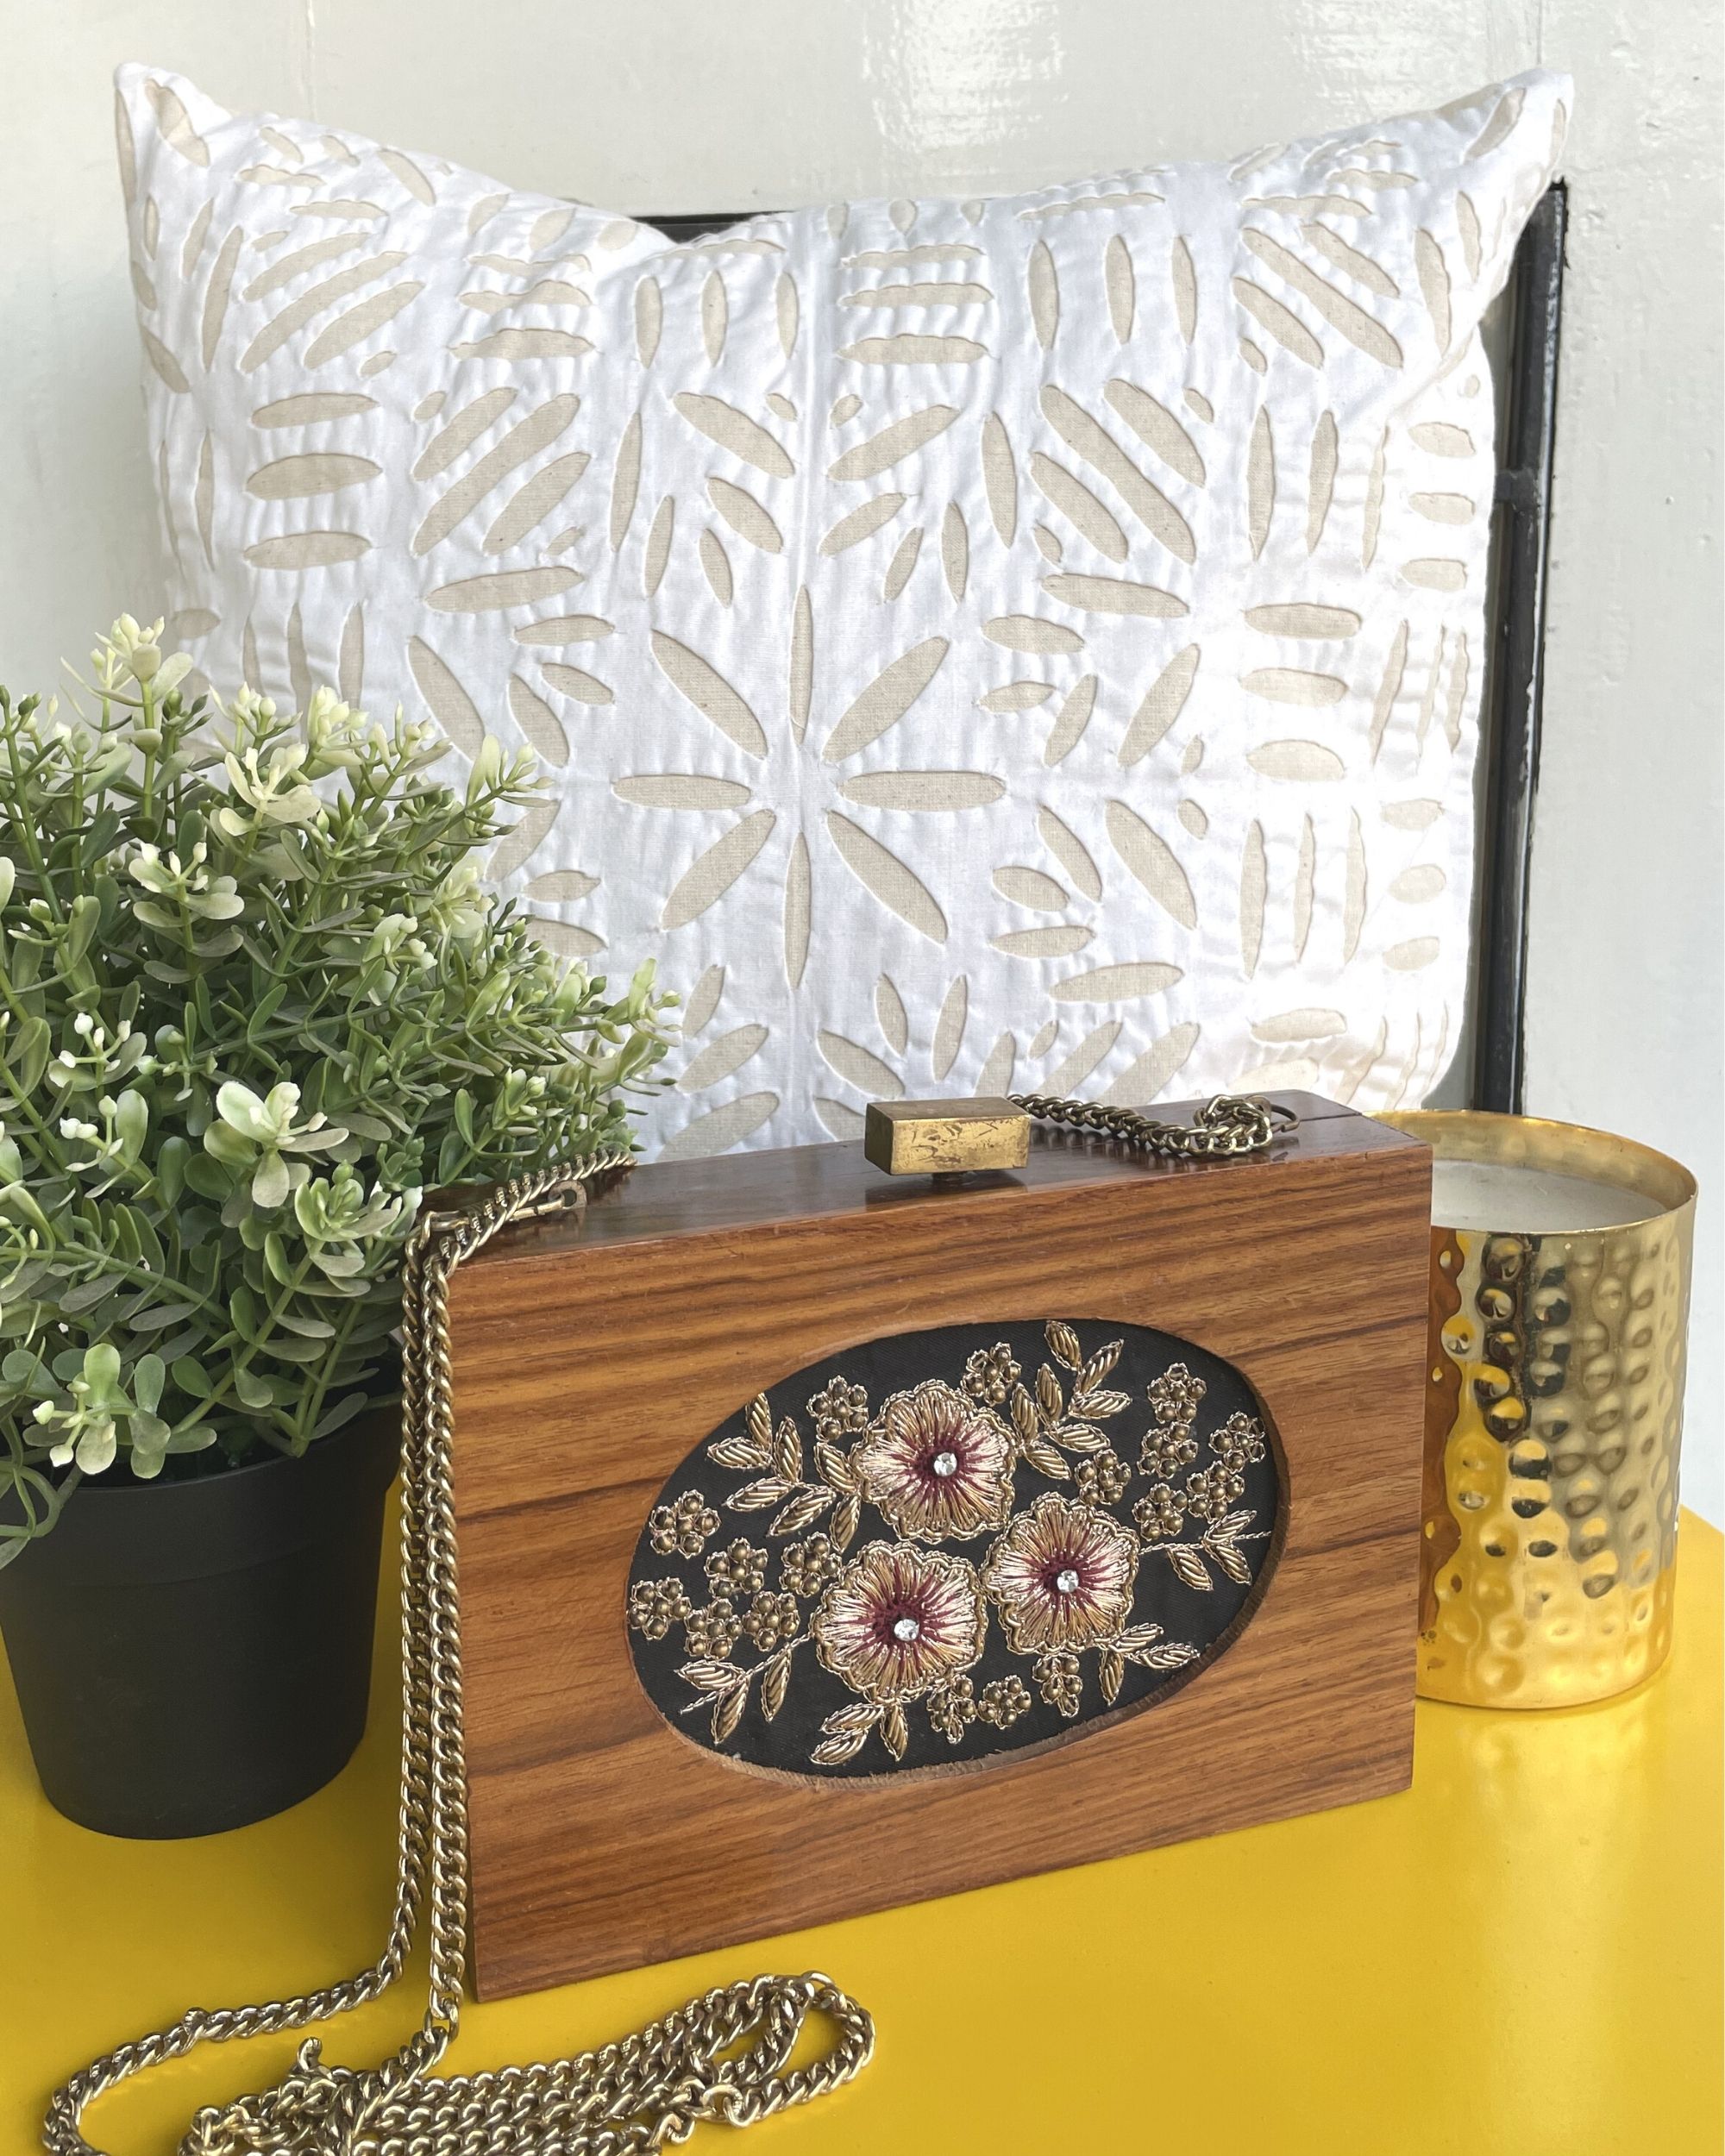 Black and brown embroidered wooden clutch with chain strap